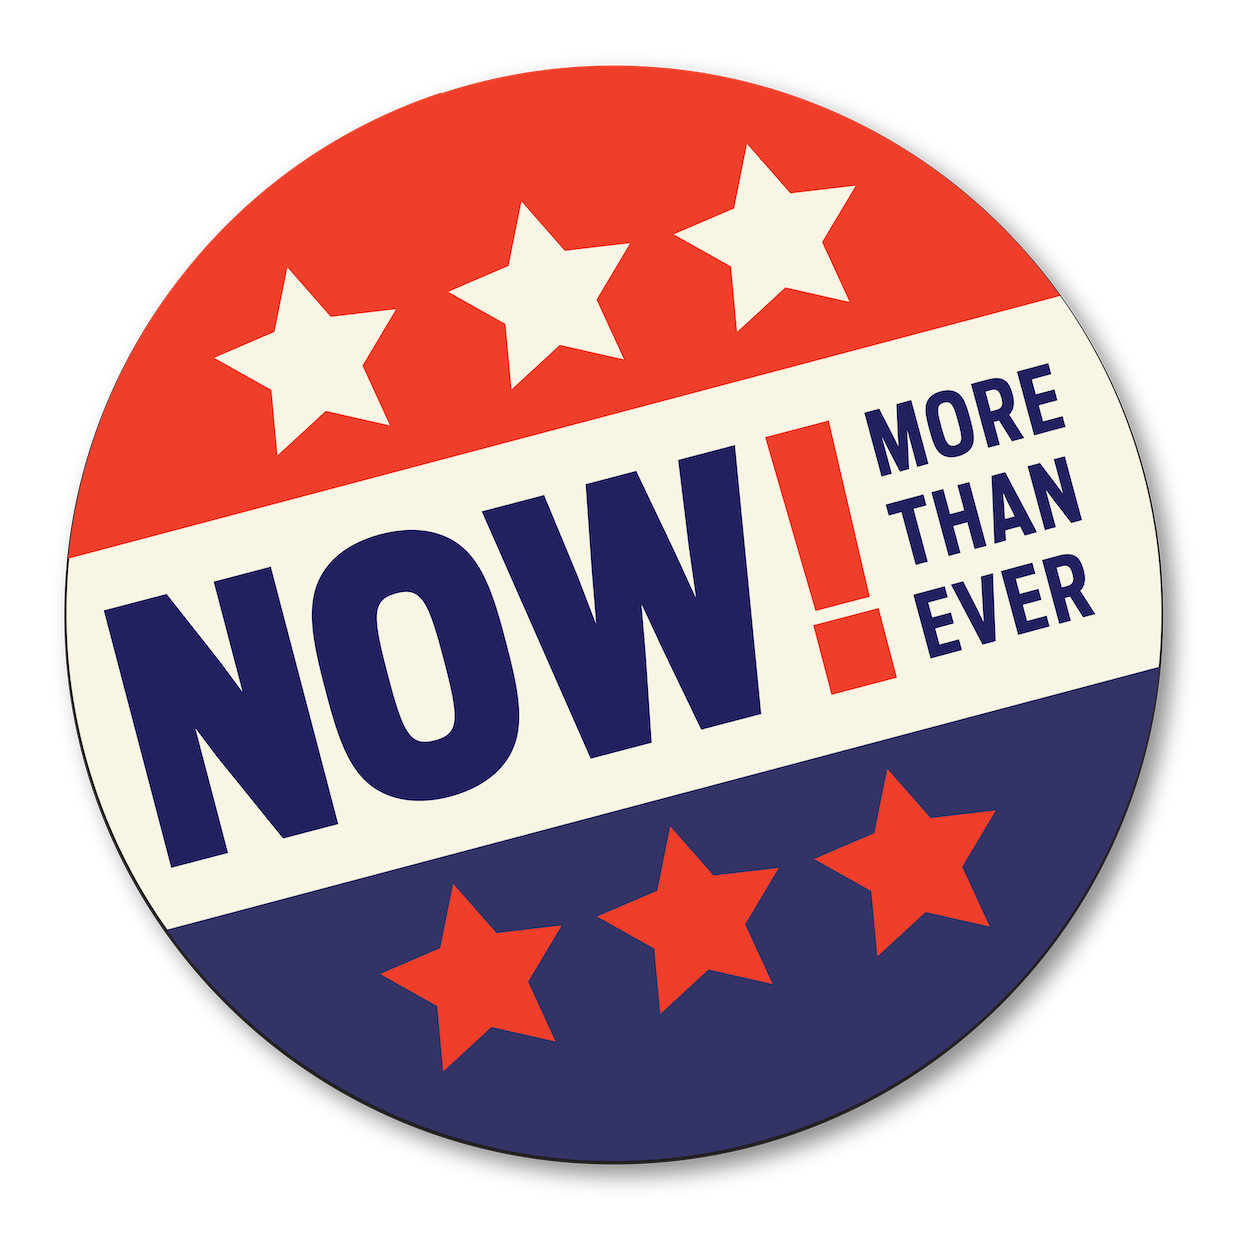 A graphic that looks like a political campaign circular pin with a red, white, and blue stripe, stars, and text that reads "Now! More Than Ever: